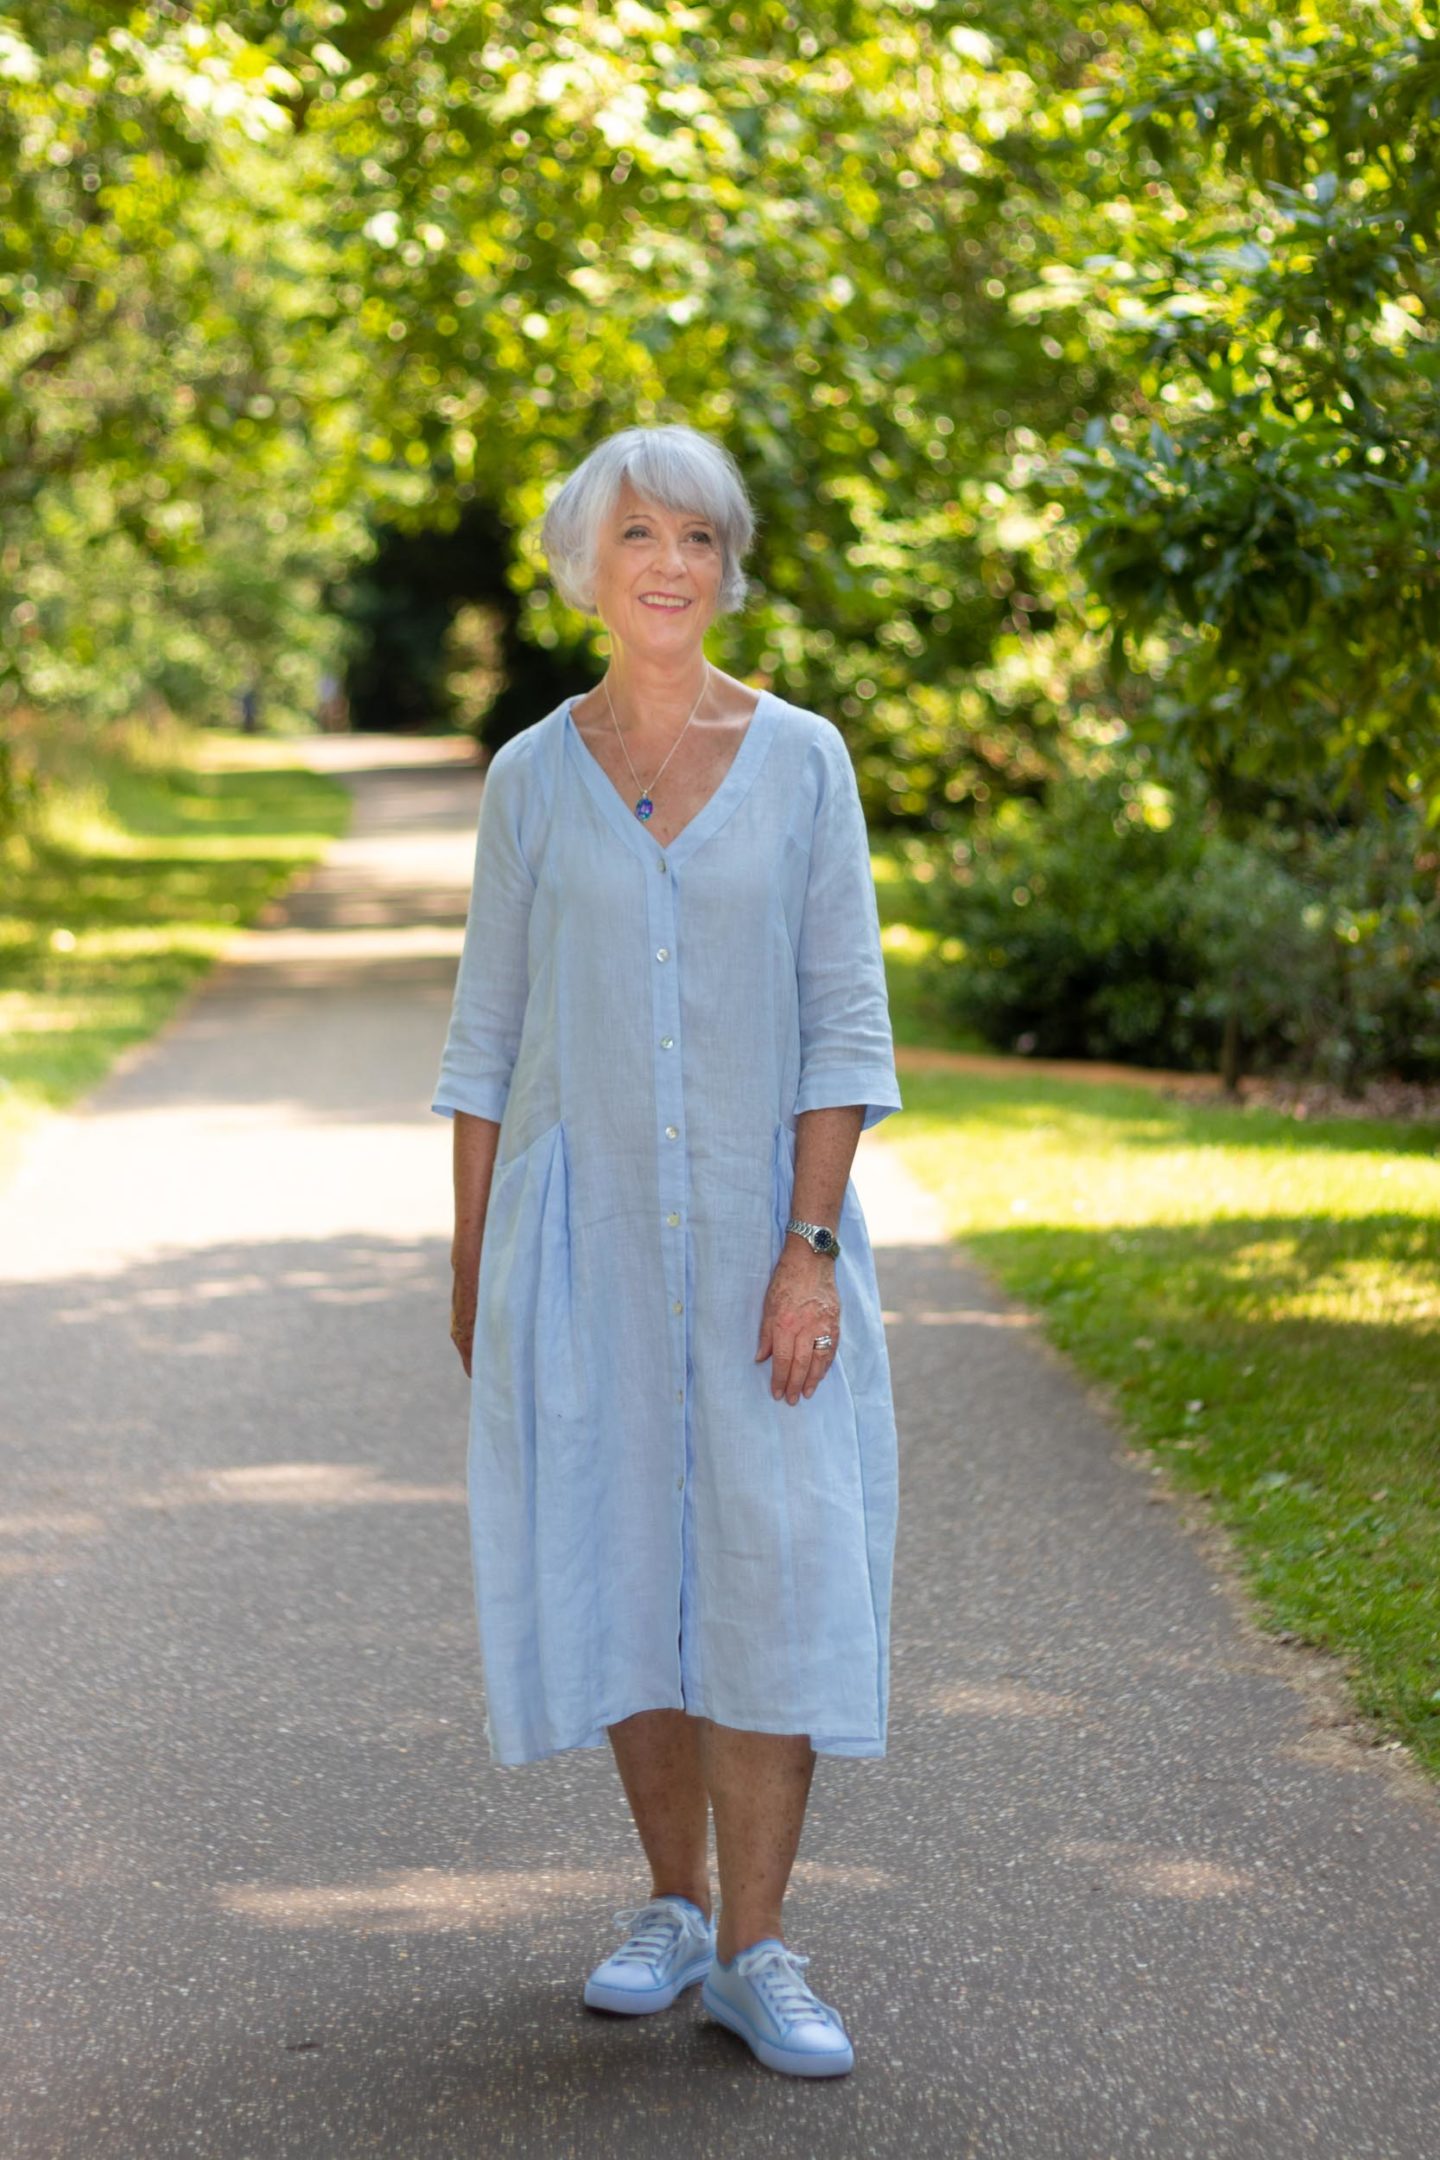 Cool linen dress for hot weather